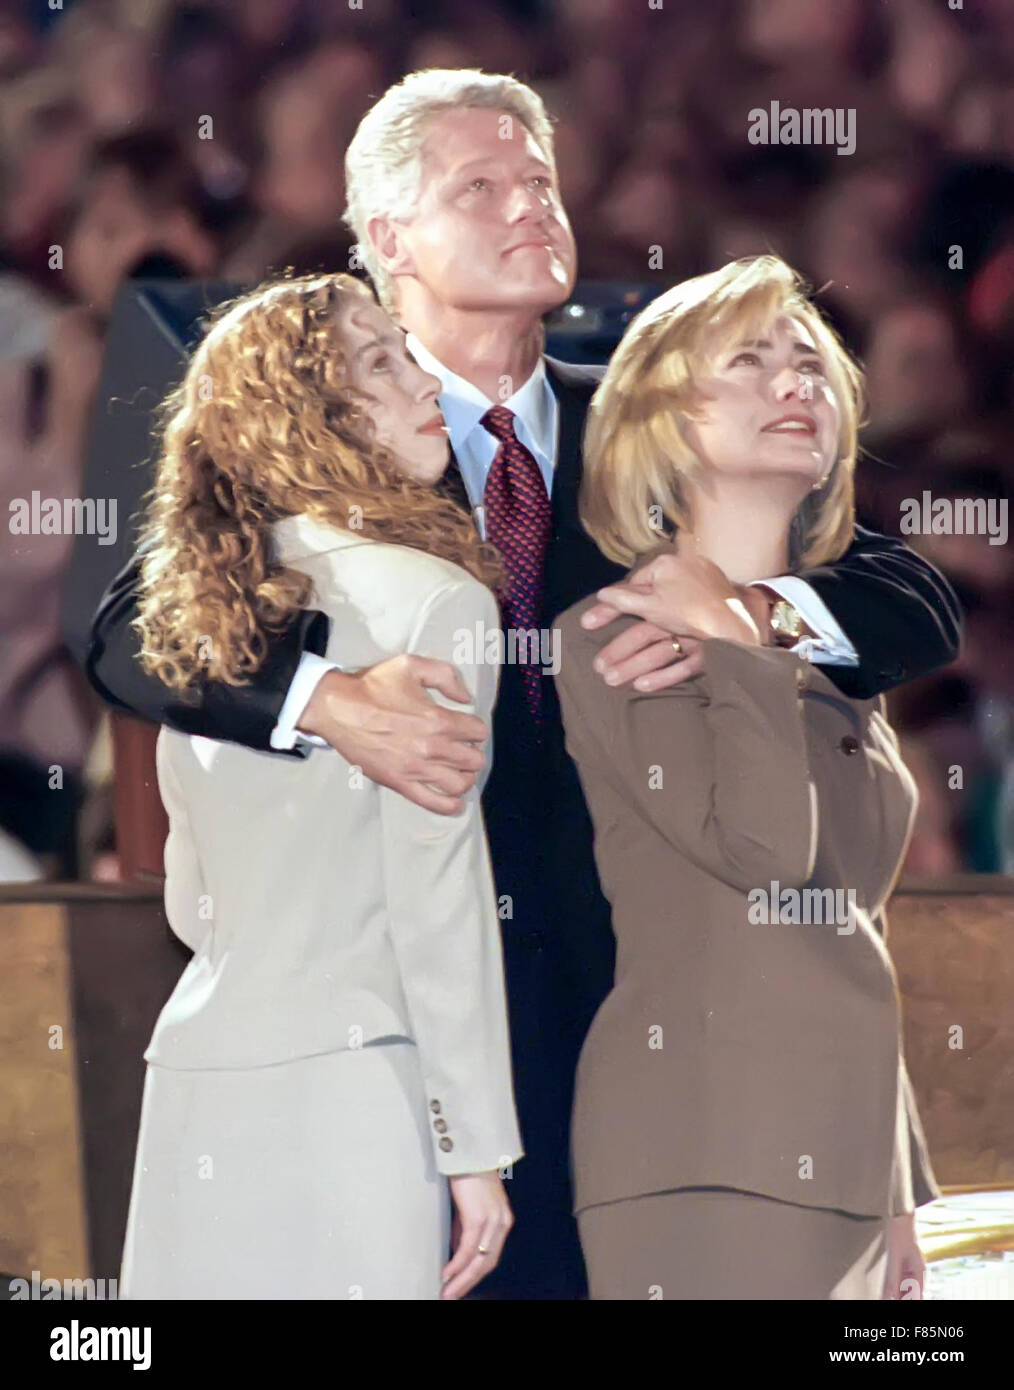 President Bill Clinton with first lady Hillary Clinton and daughter Chelsea in Little Rock, Arkansas, watching a screen confirming his re-election in 1996. Stock Photo